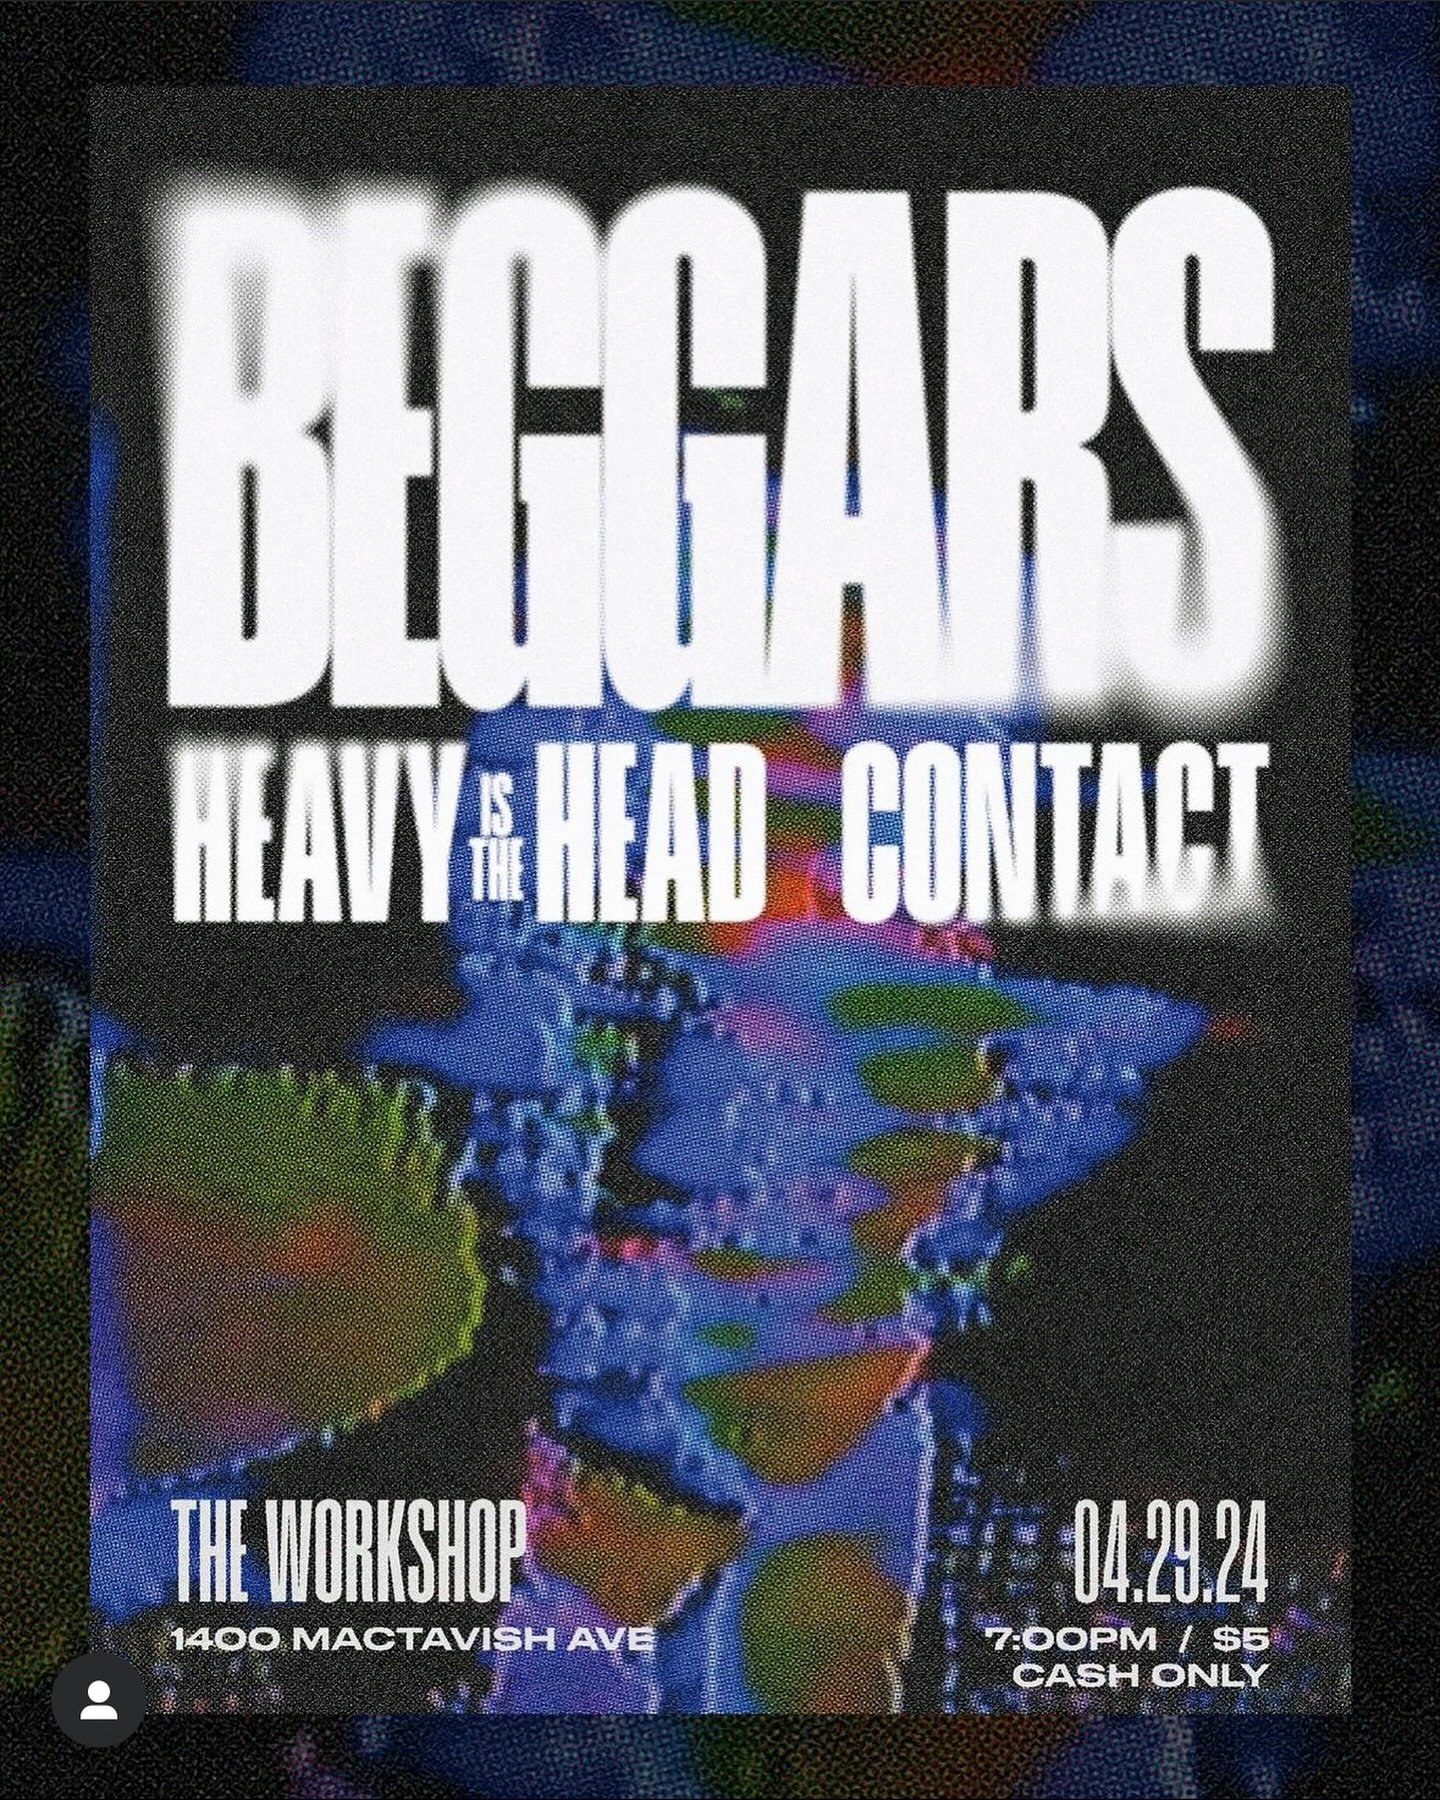 Tonight kicks off our first Metal Monday! Come see @heavyistheheadva @contacthardcore @beggarsrva at 7 p.m. $5 to get in
#notyouraverageevents #musicattheworkshop